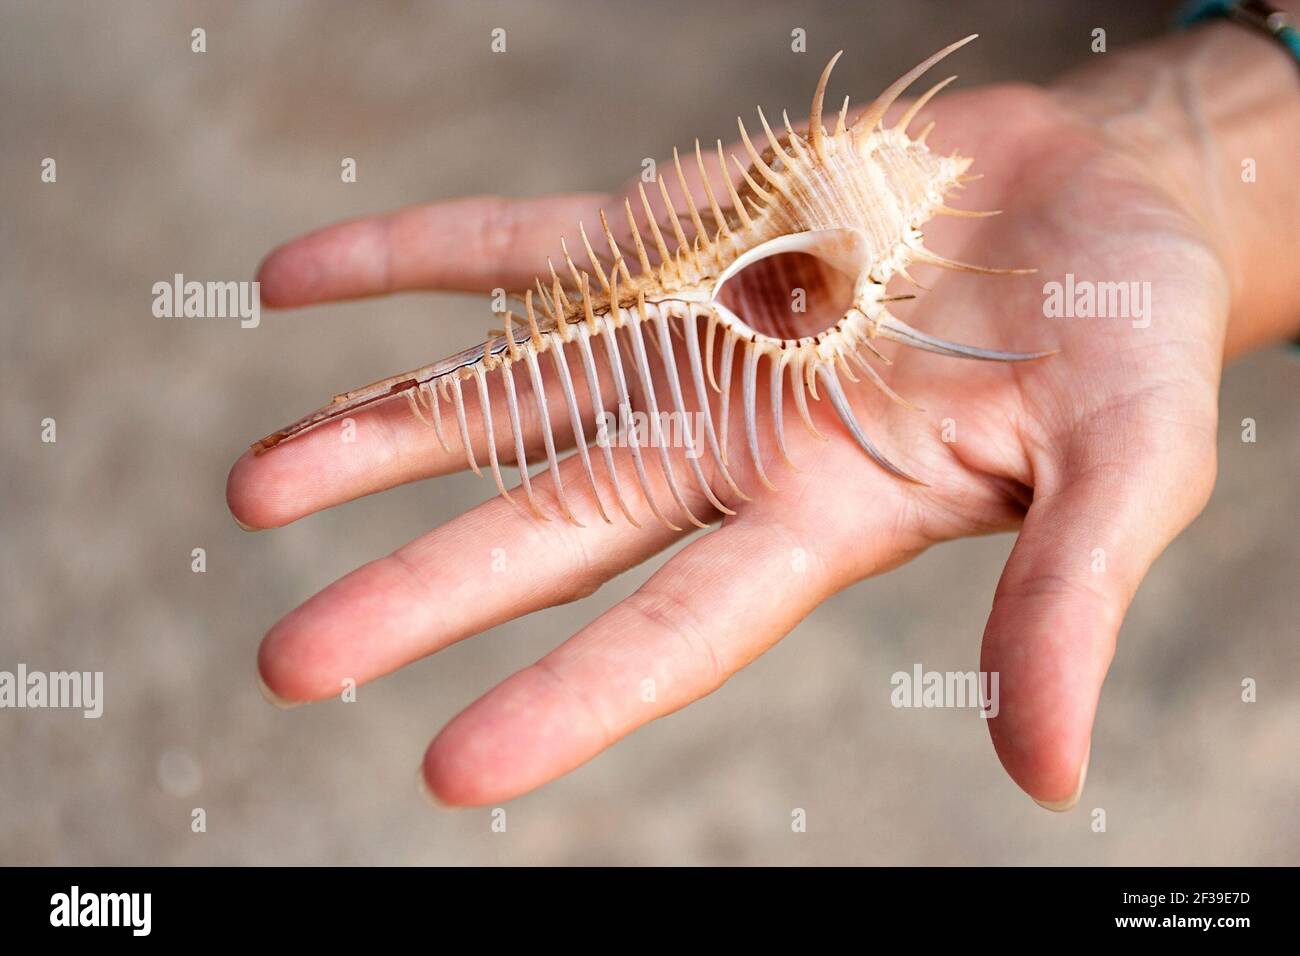 Murex troscheli on hand, Troschel's Murex Shell, spine covered, club-shaped, long straight siphonal canal, cream, white with light brown whorls Stock Photo